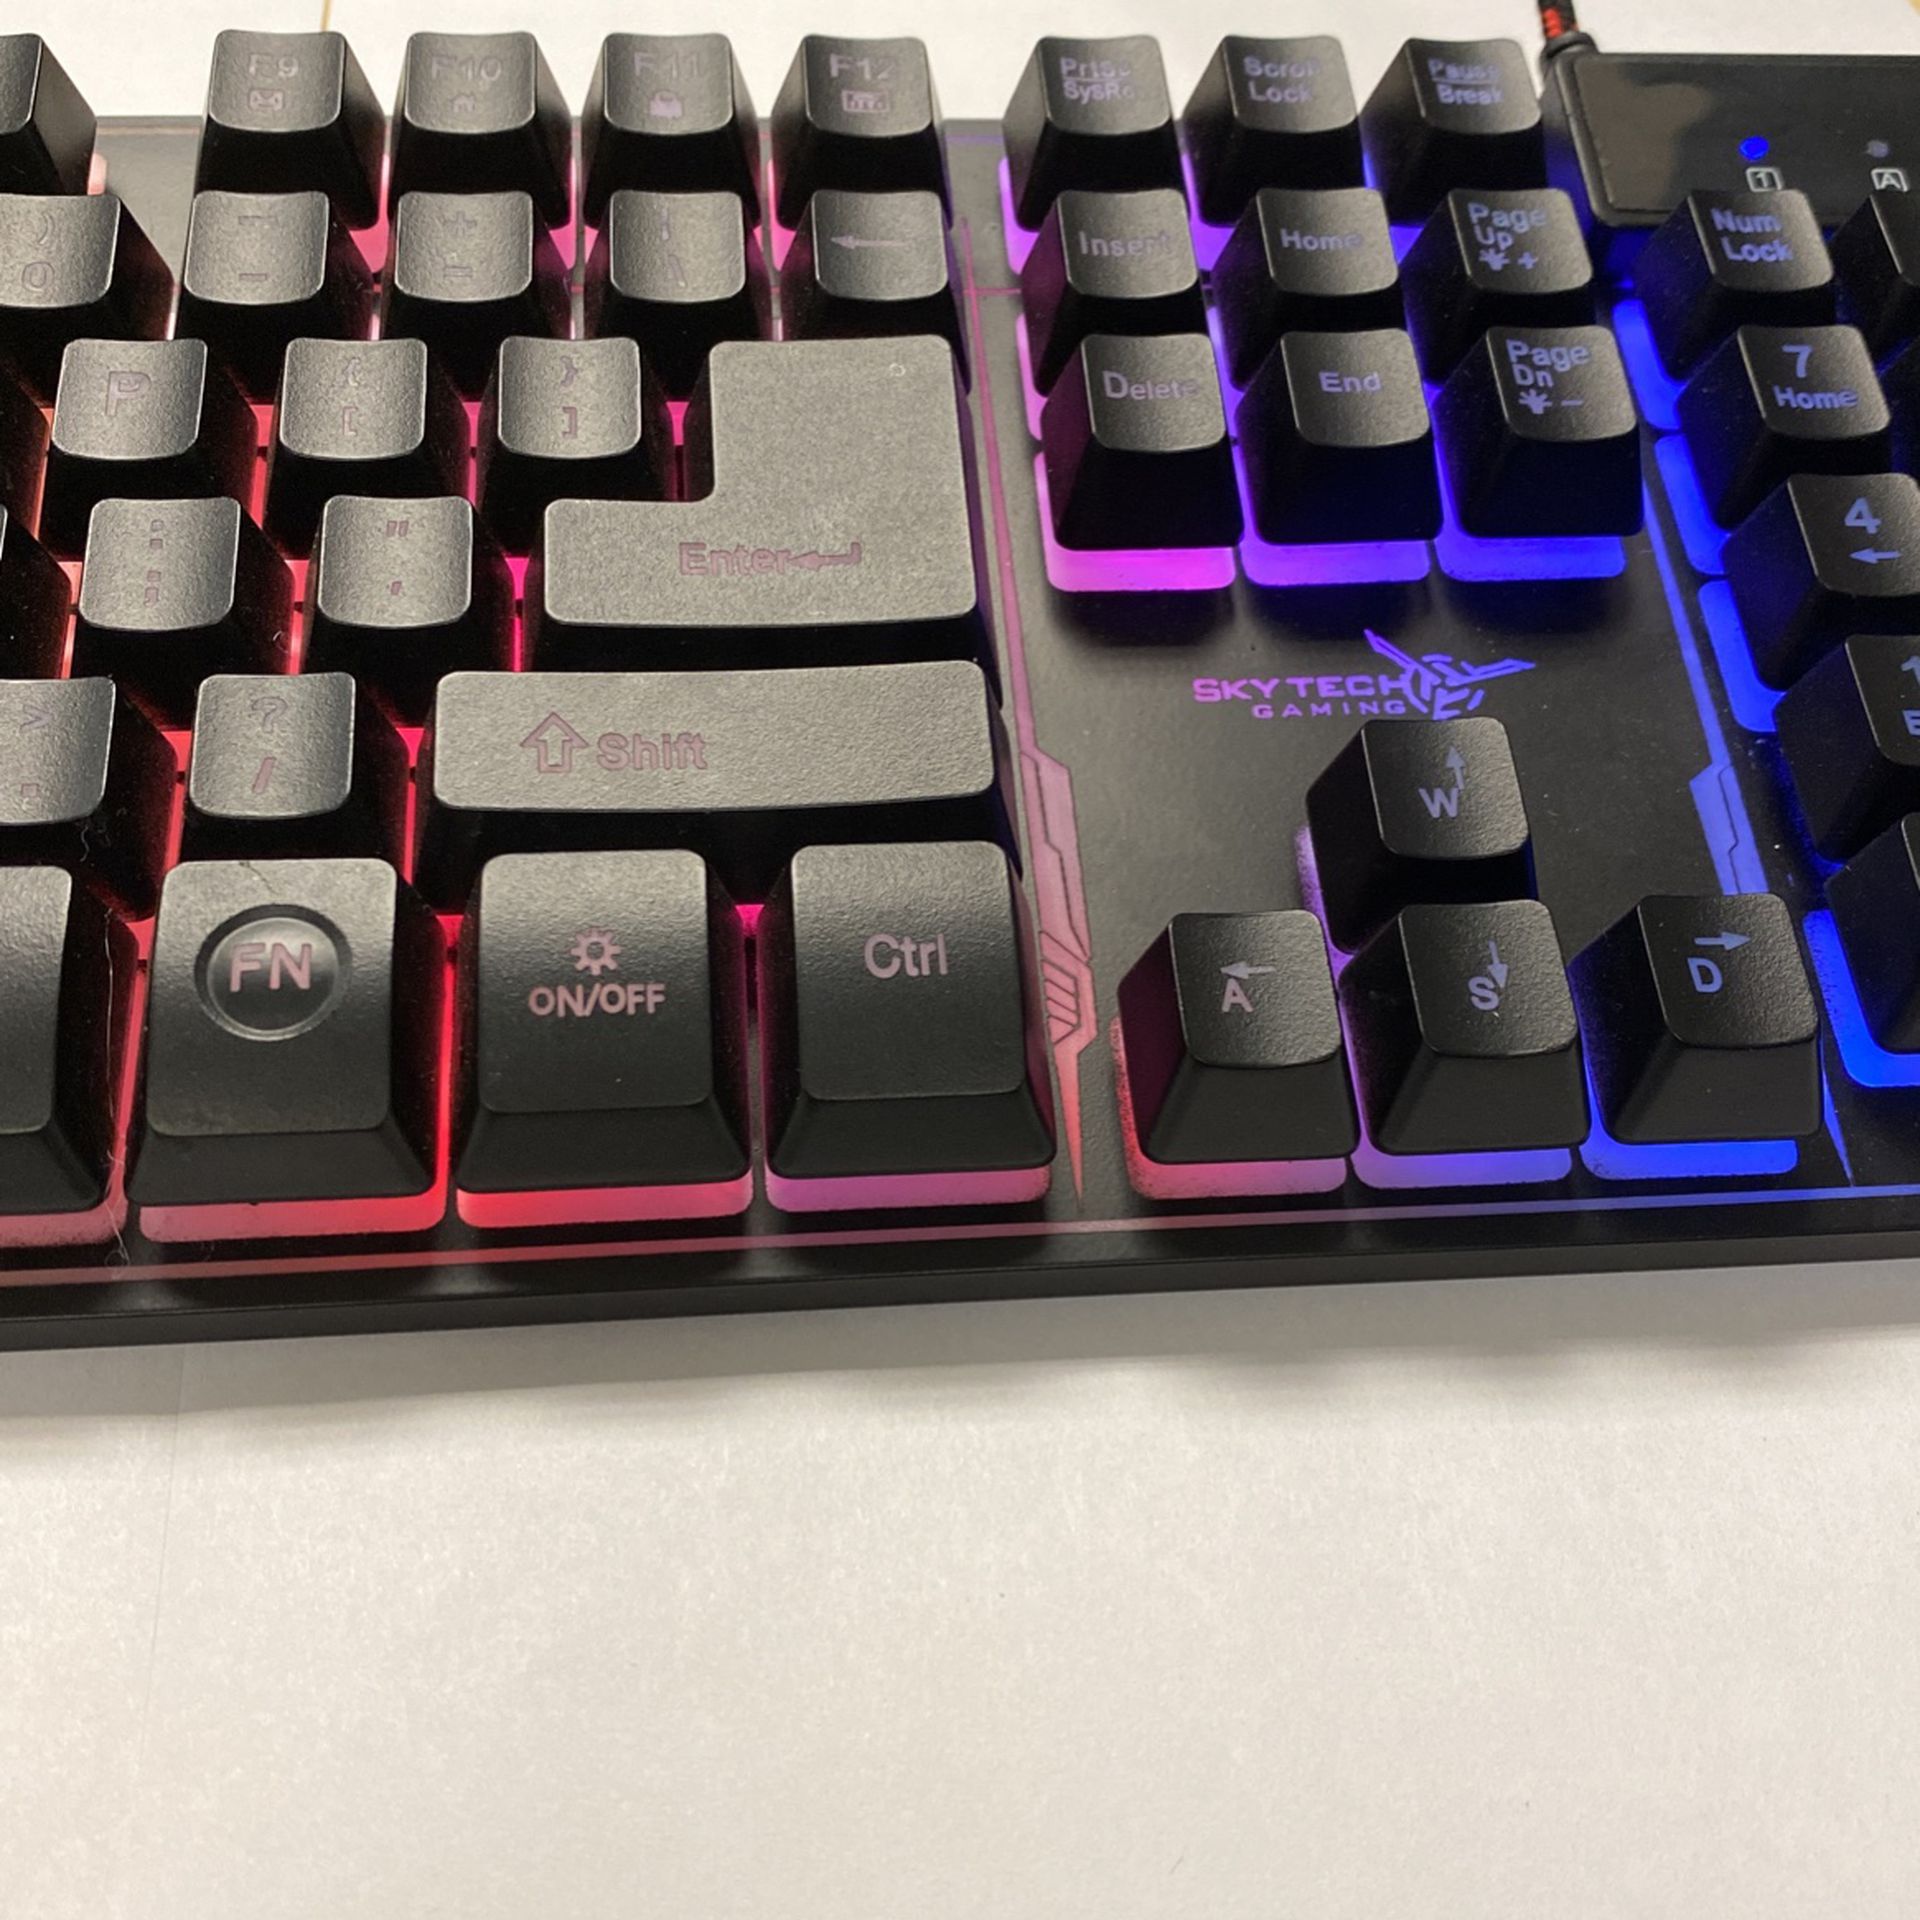 RGB Keyboard And Mouse - Sky tech Gaming